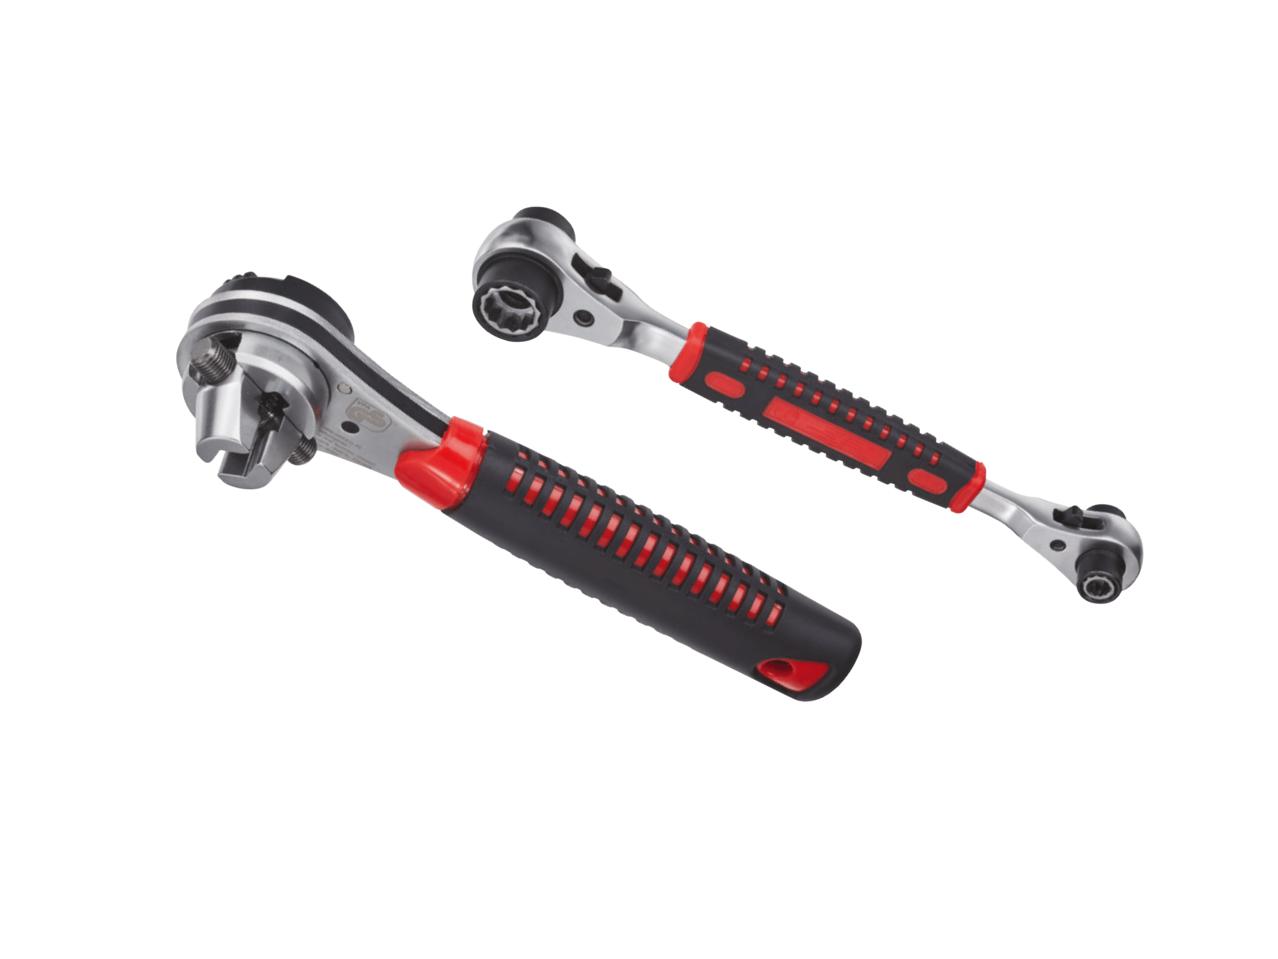 POWERFIX(R) Multi-Functional Ratchet/ 8-in-1 Ratchet Wrench